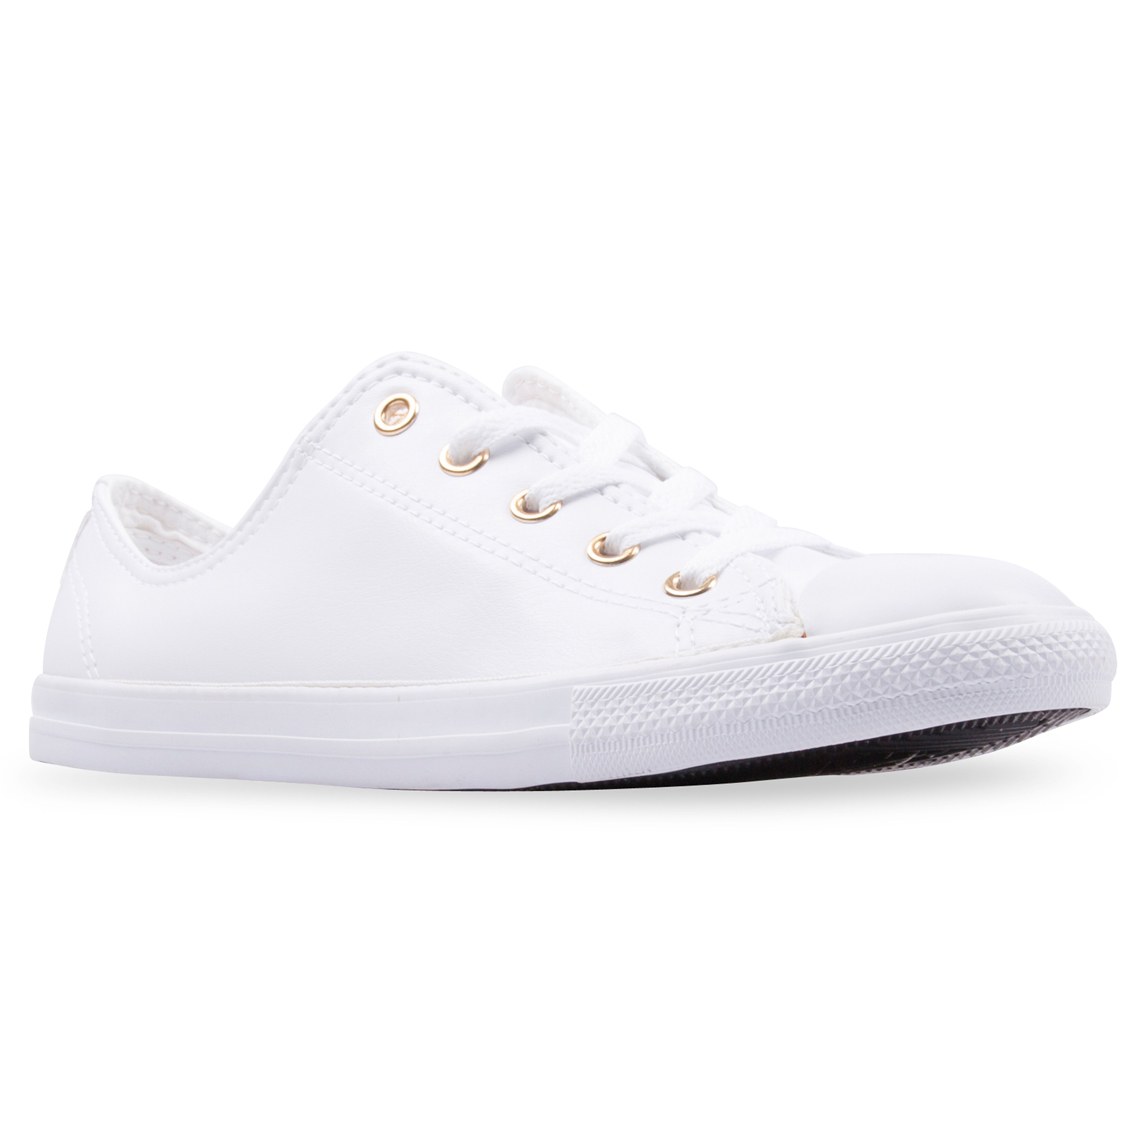 Converse ALL STAR DAINTY OX White/Gold 